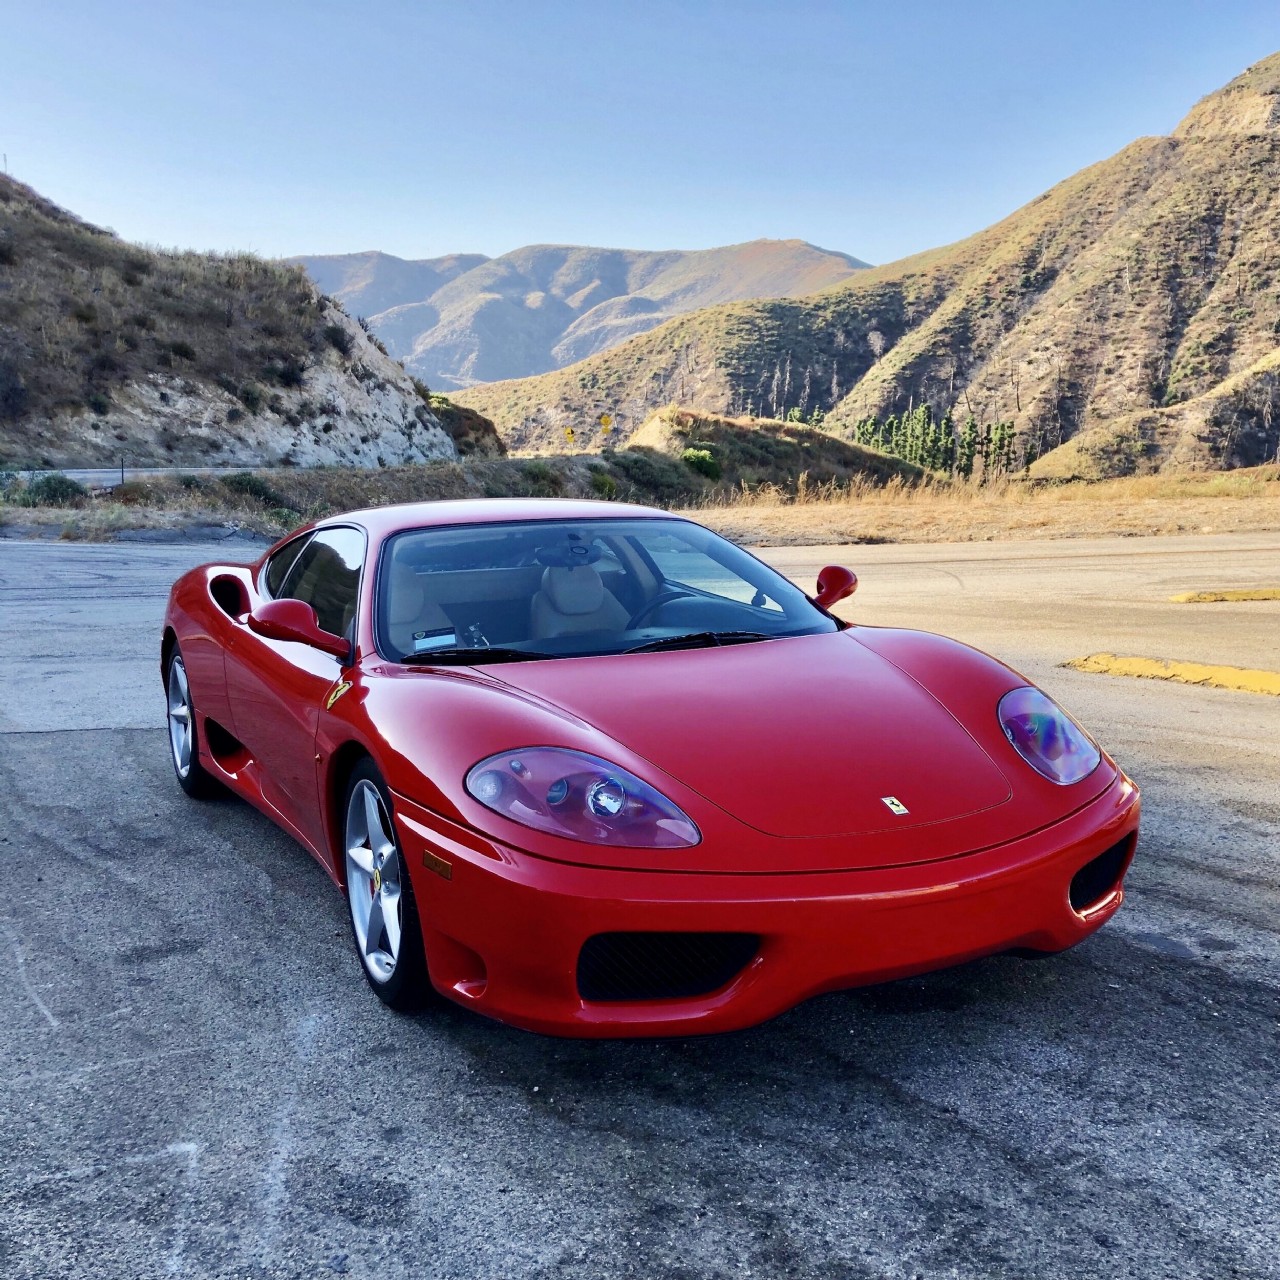 The recommended oil capacity for the Ferrari 360